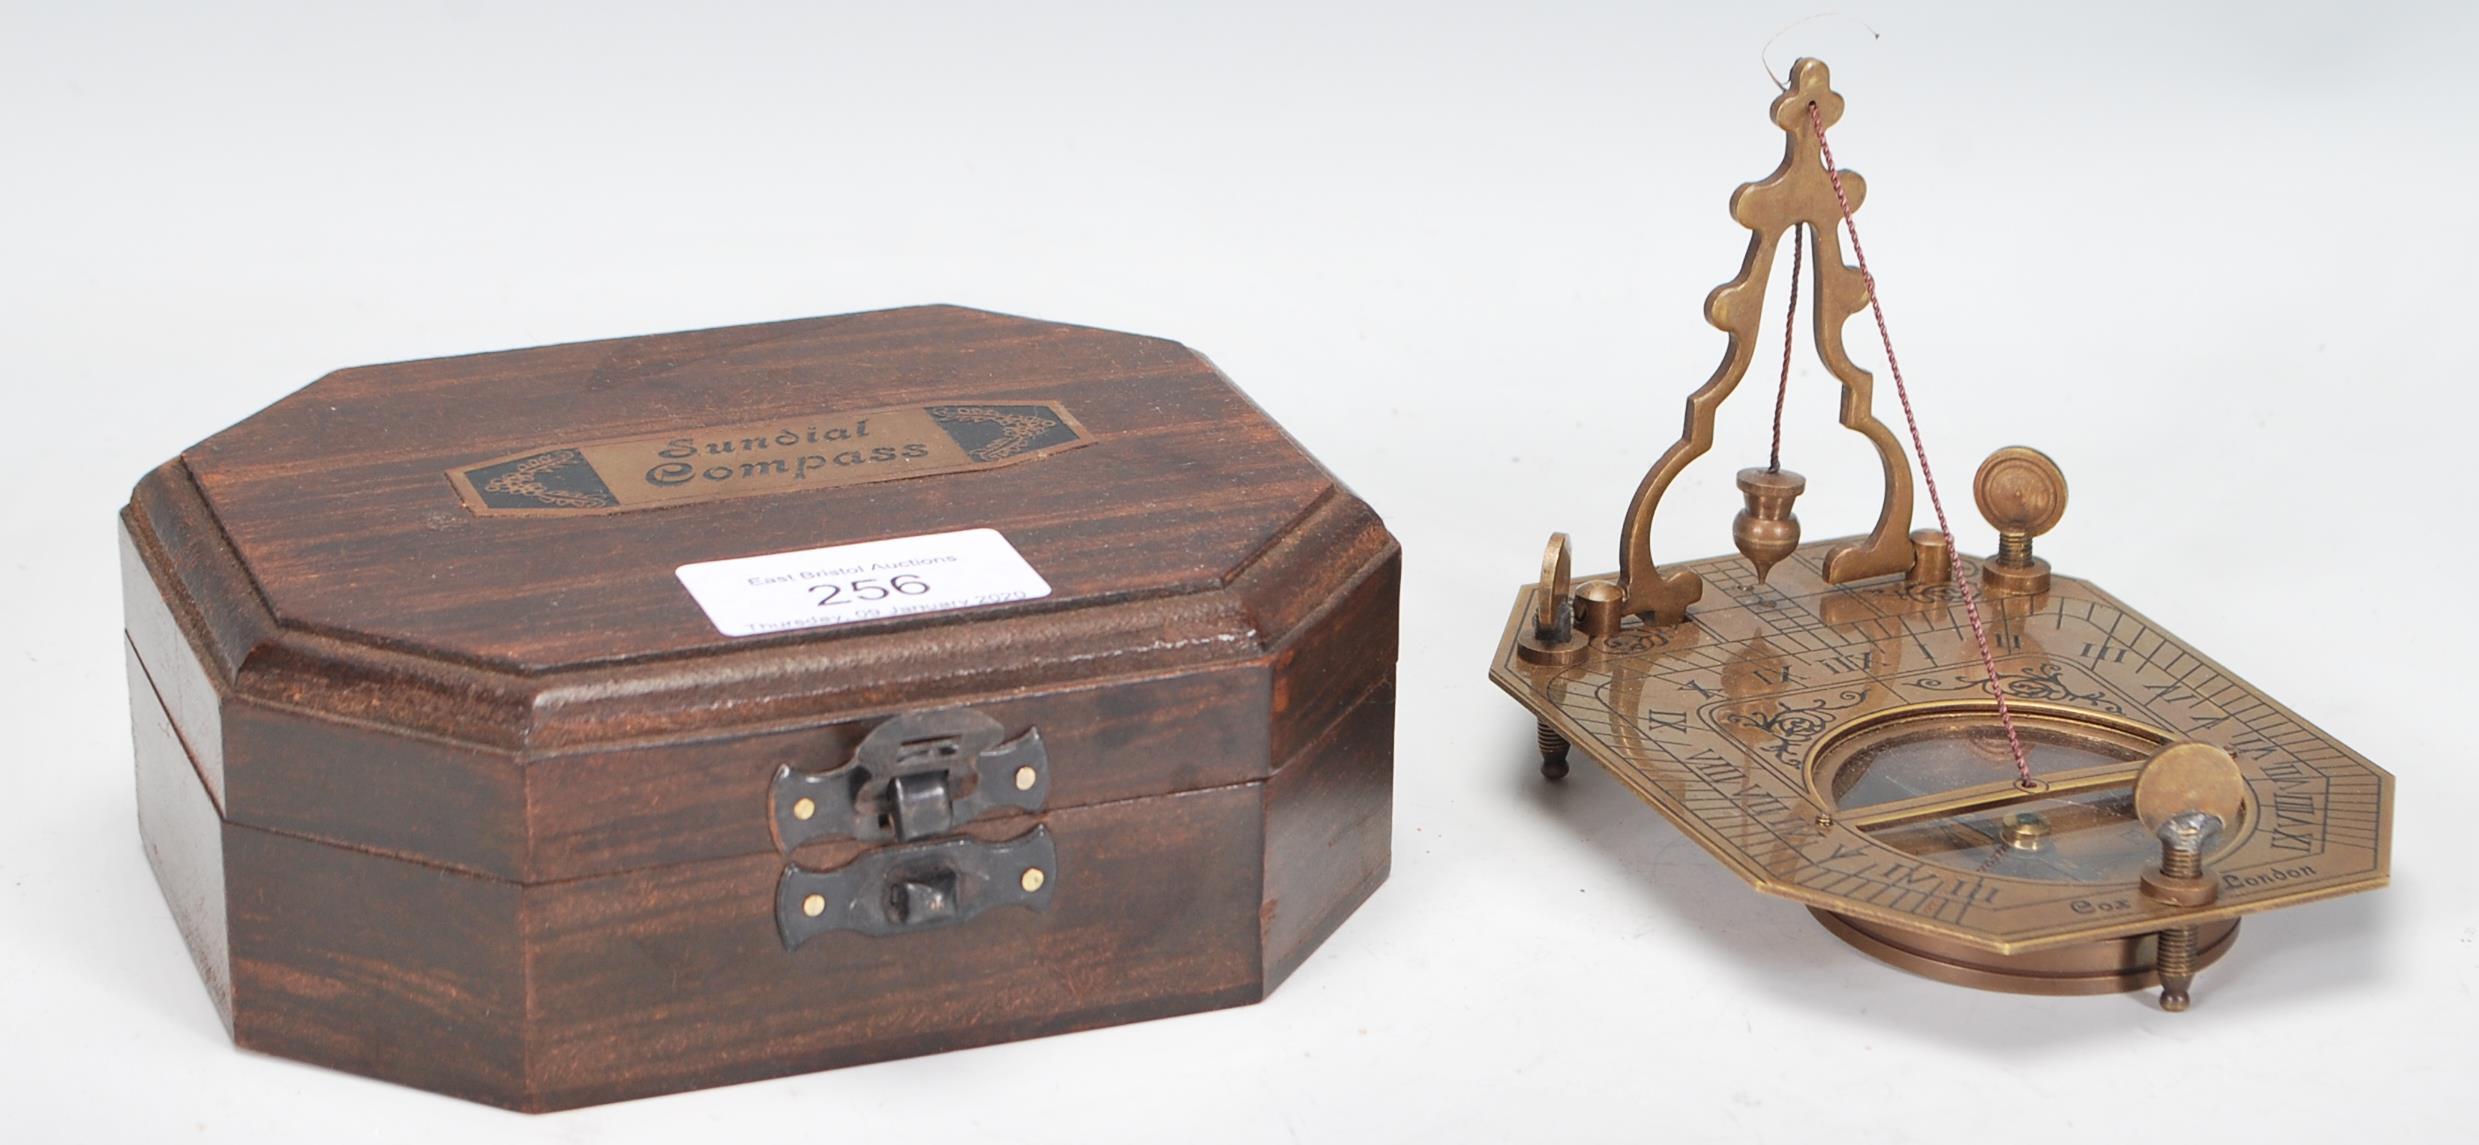 A 20th Century cased brass Sundial Compass, the compass set within the folding metamorphic